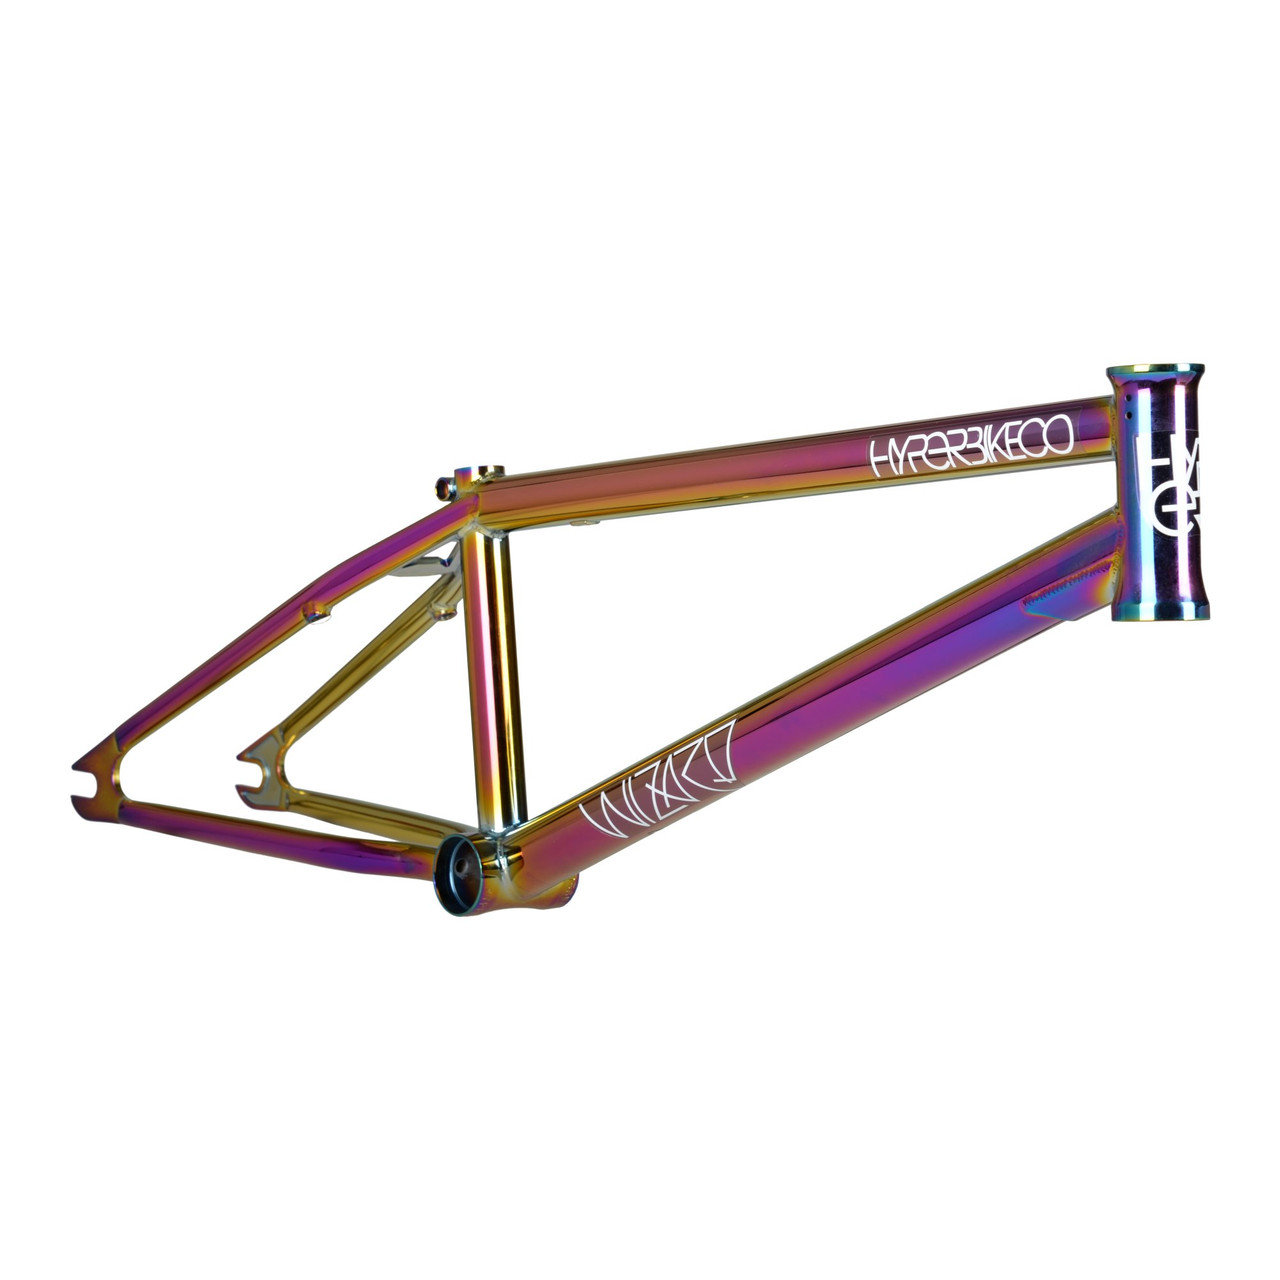 Hyper Wizard frame. Wizard frames come in 20.4 and 20.8 blackm Chrome or  Jet Fuel